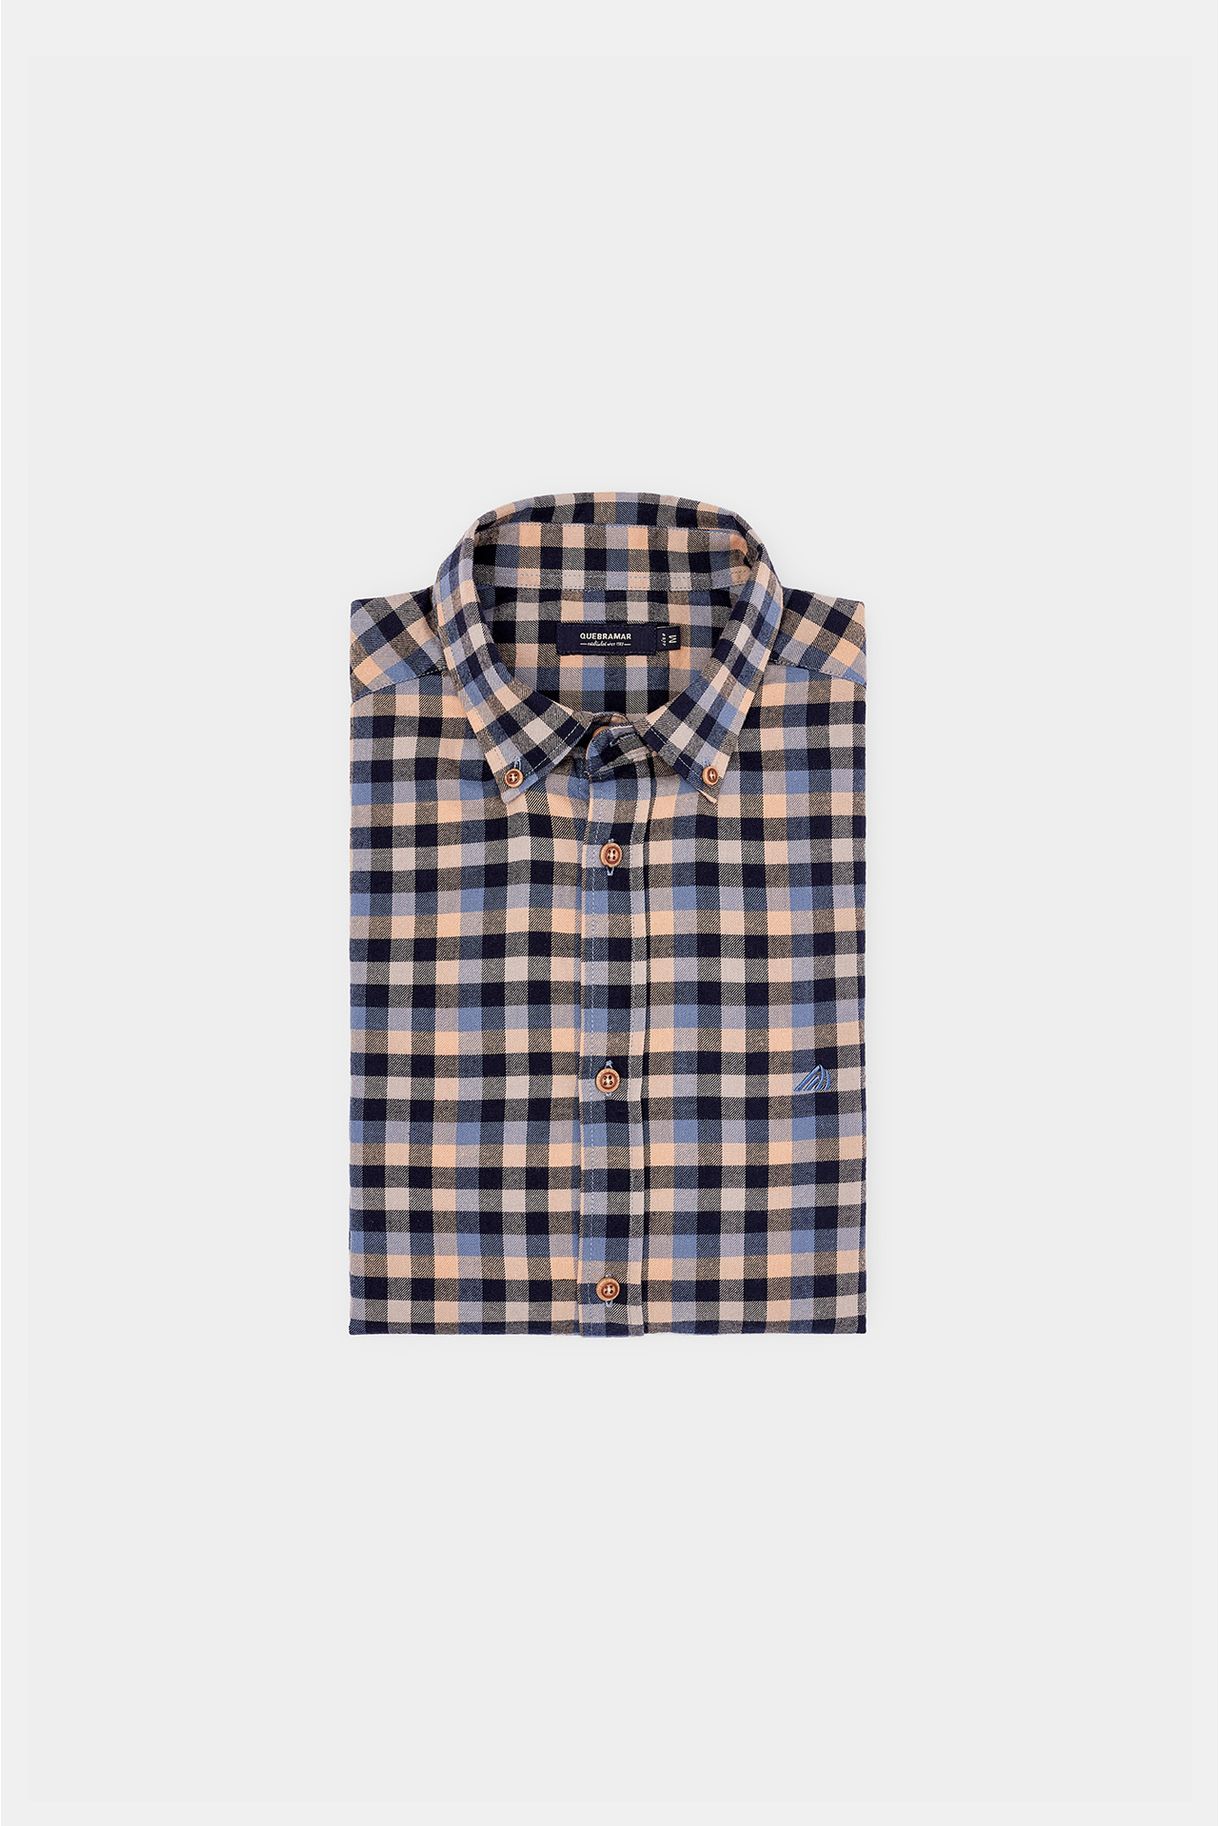 SHIRT IN SQUARES